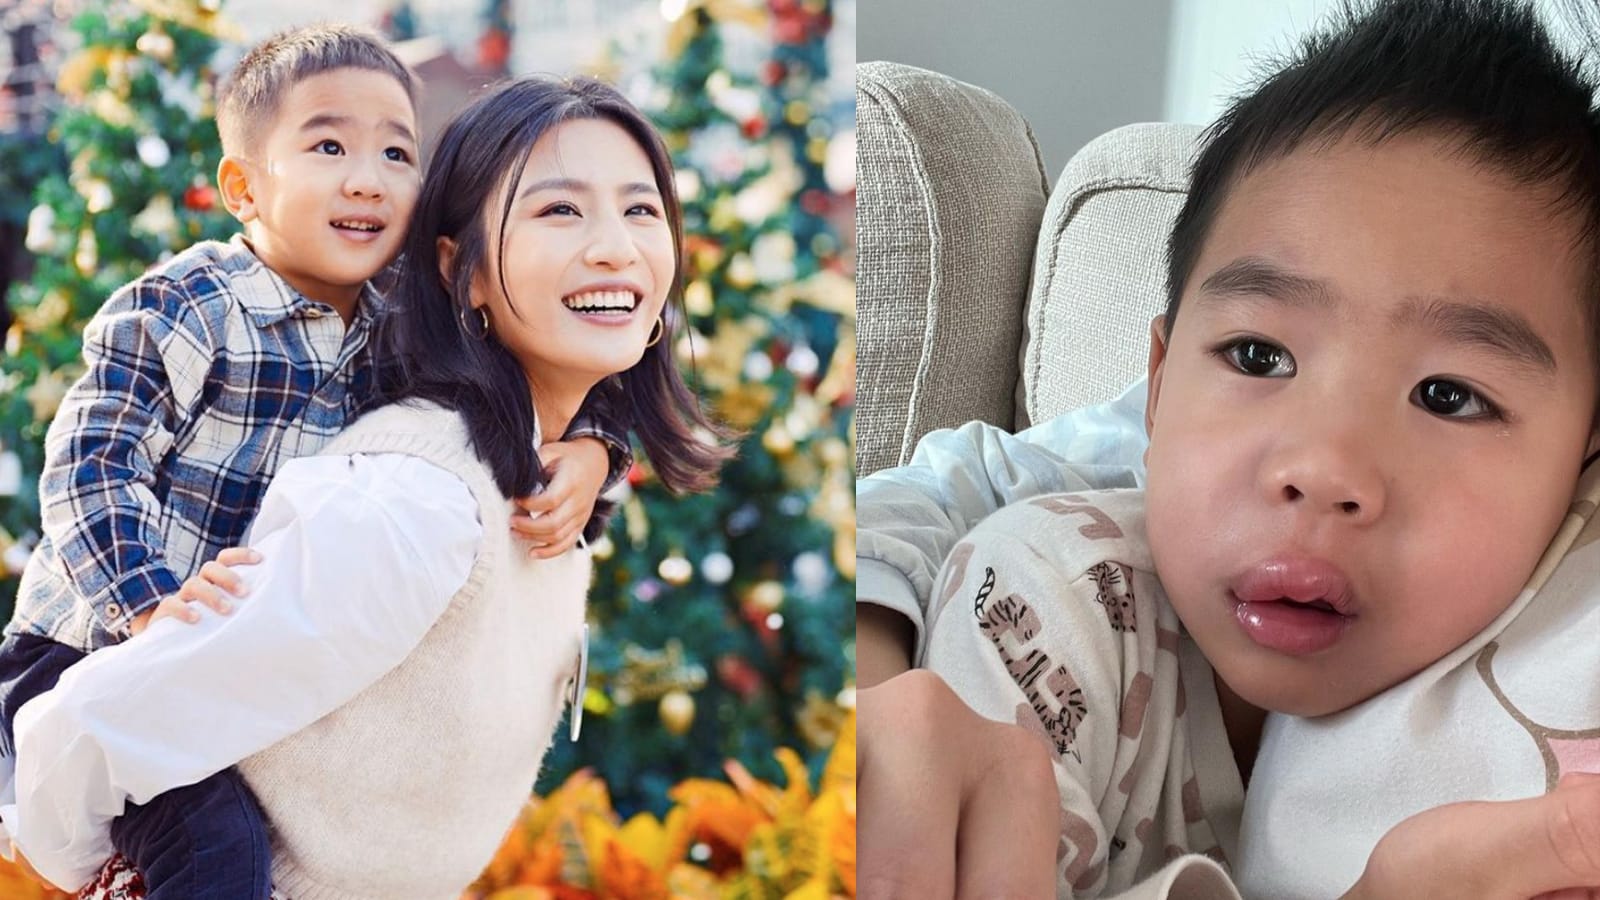 Ex TVB Star Coffee Lam Called A “Bad Mother” For Not Knowing That Her Son, 3, Had Severe Tooth Decay